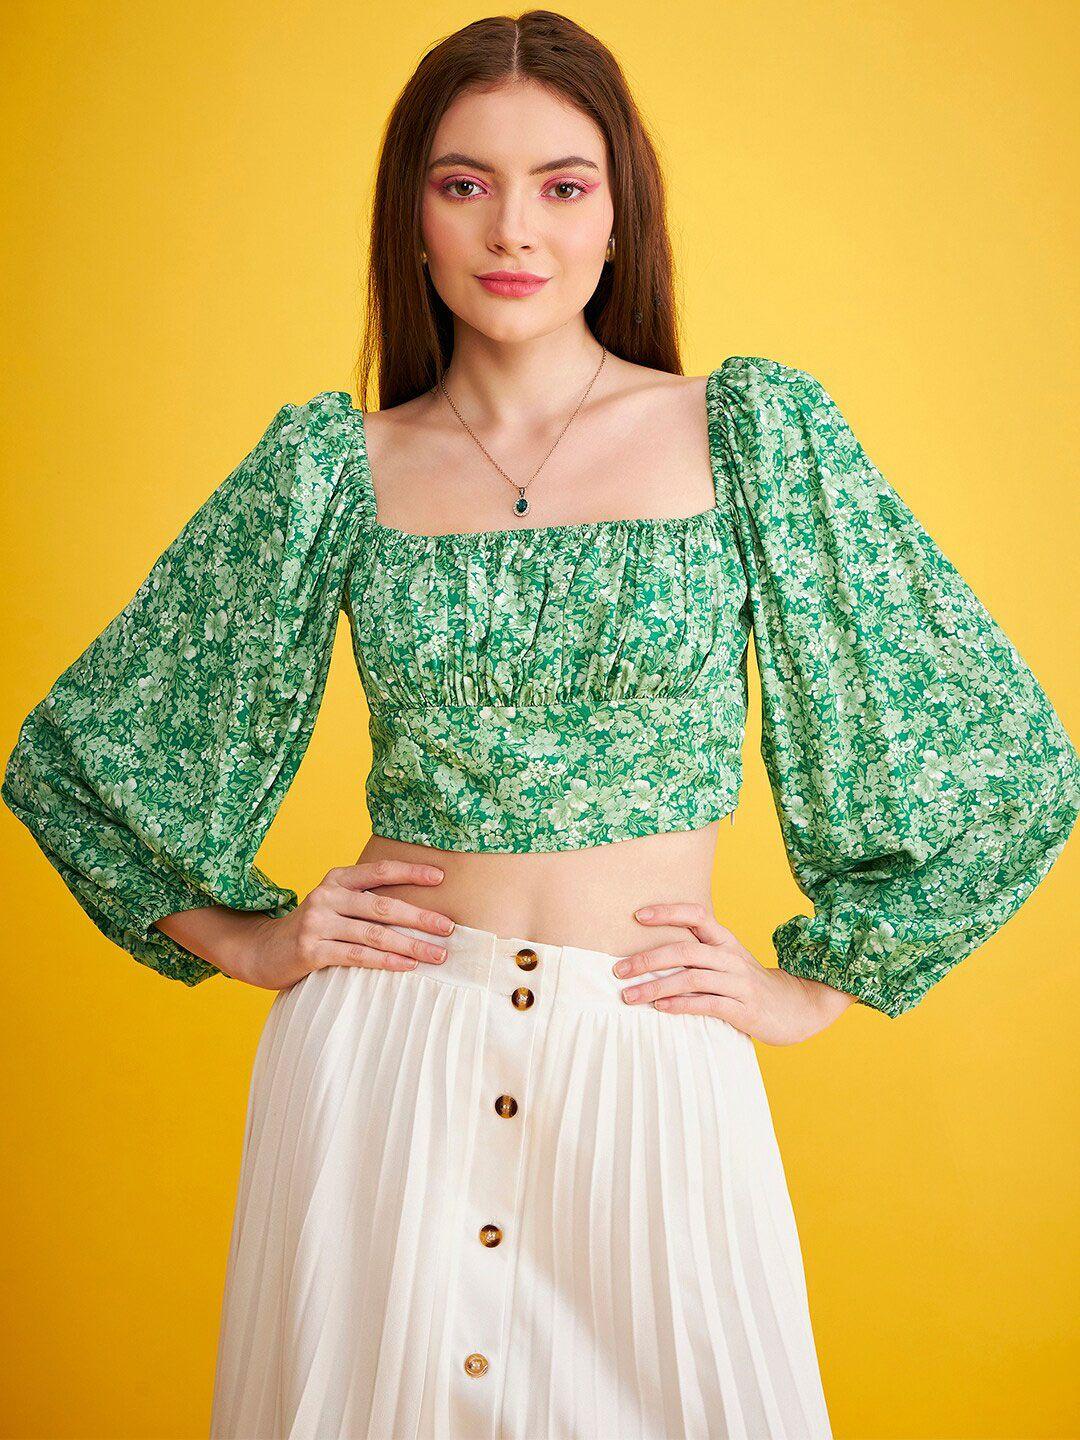 delan floral printed puff sleeves gathered or pleated empire crop top